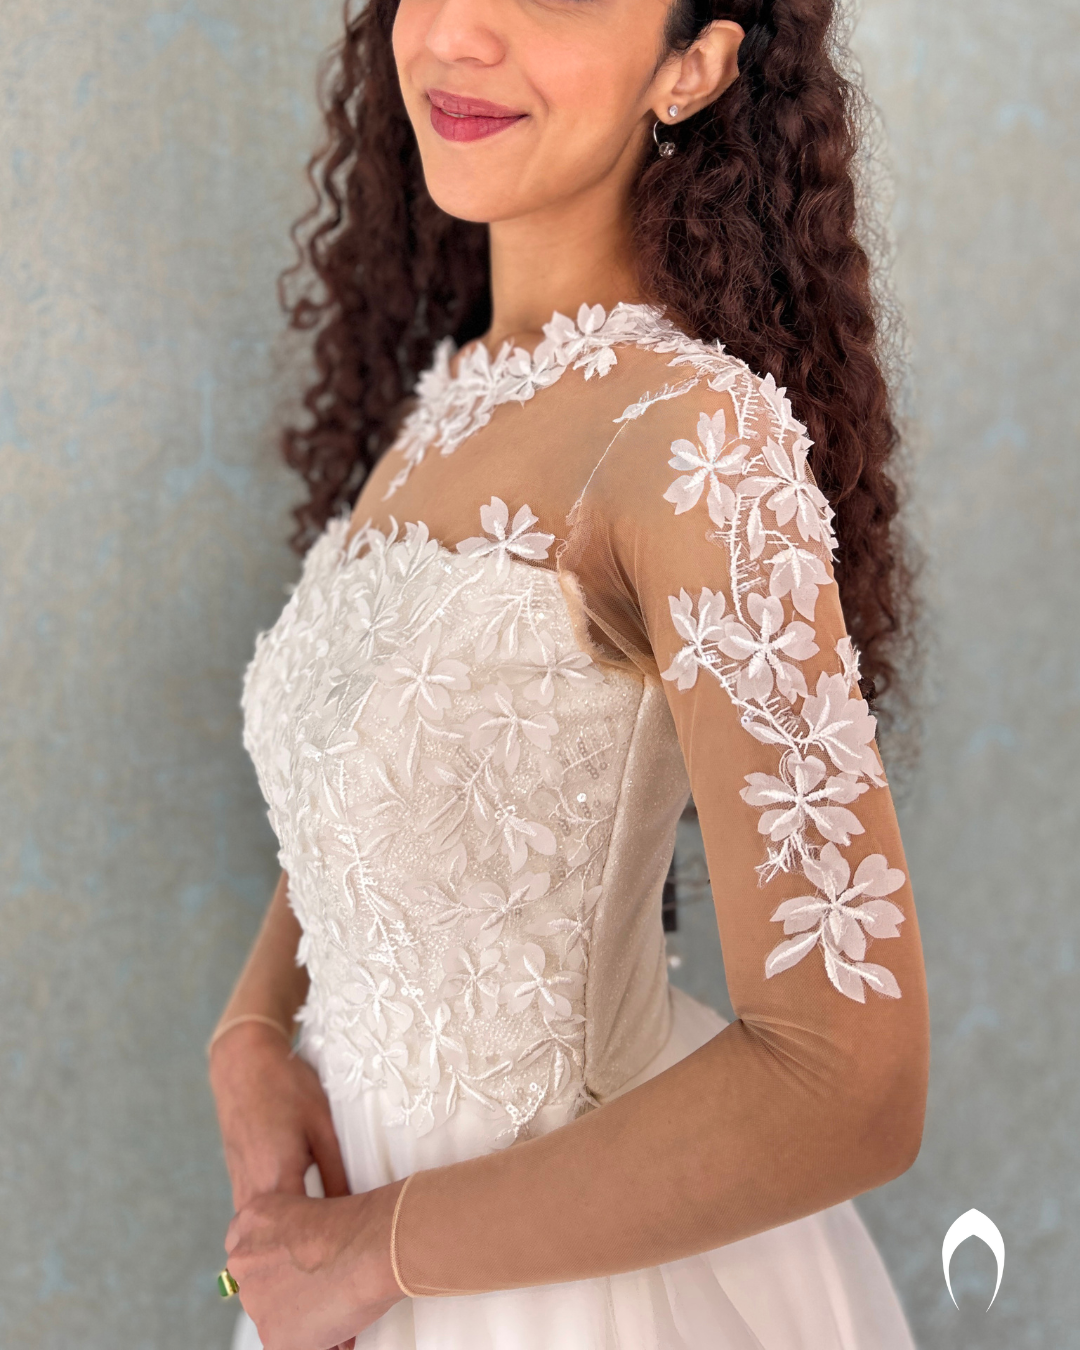 Signature bridal Aline with floral lace embroidery